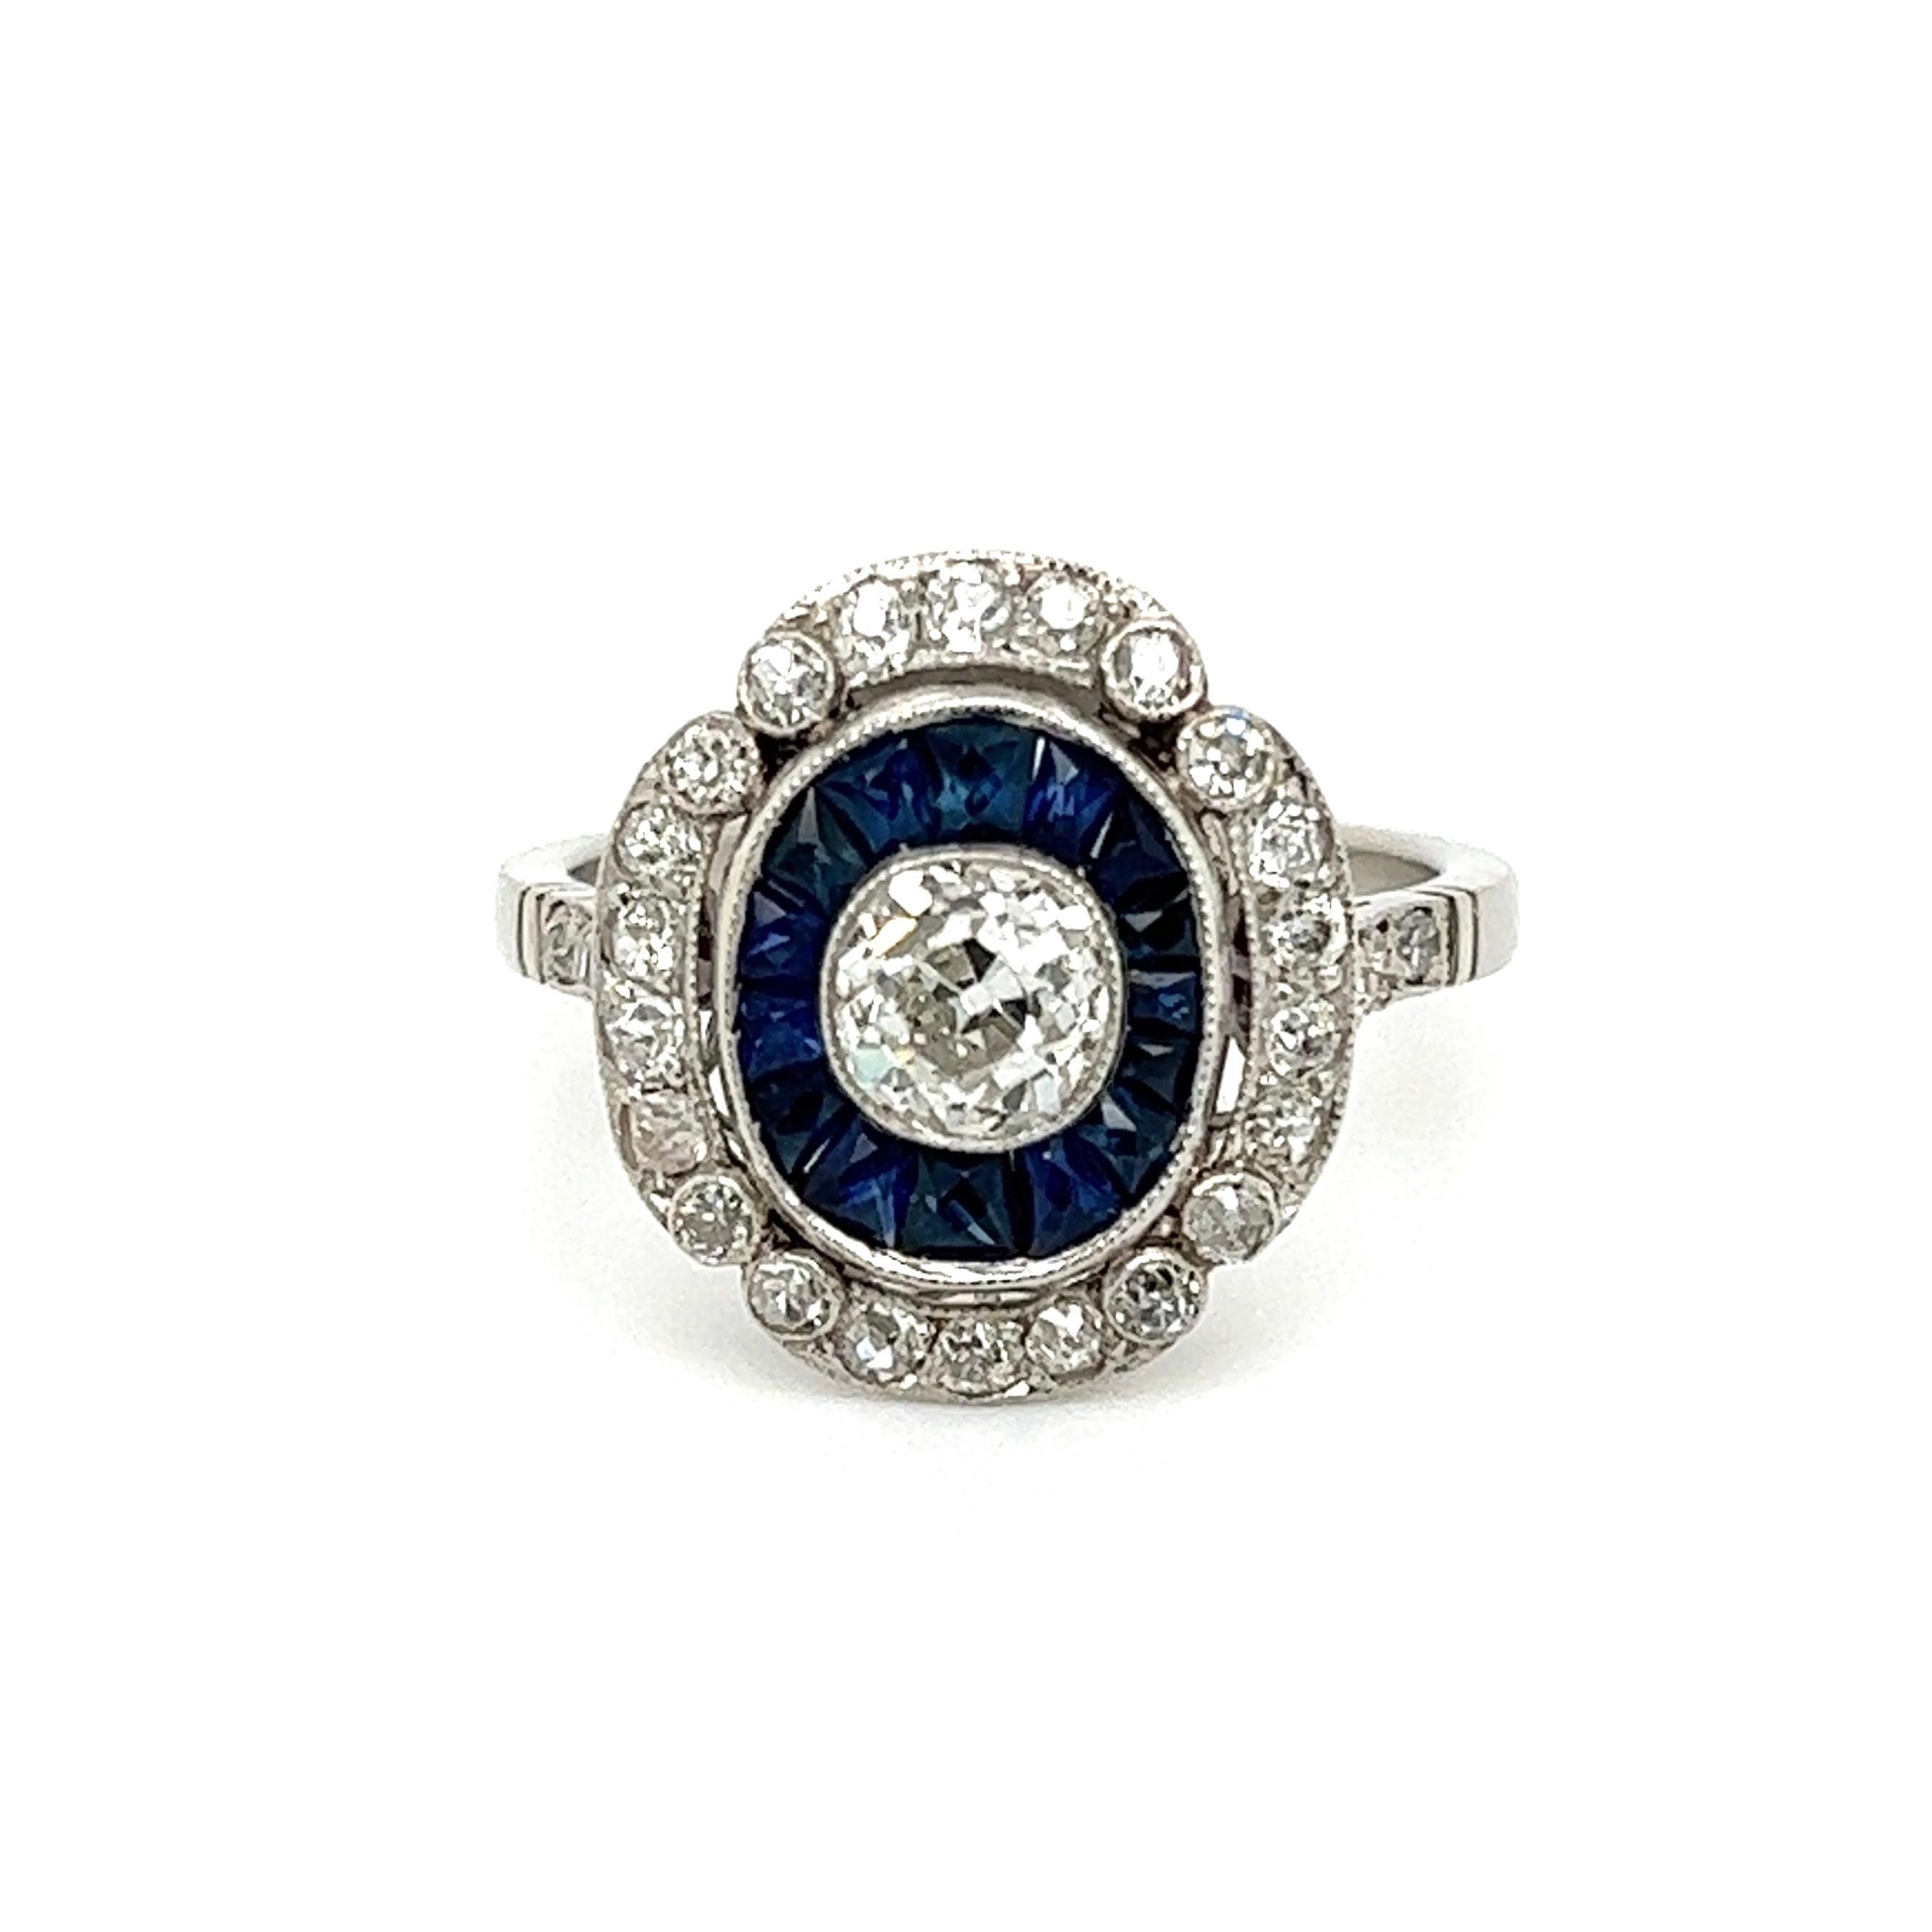 Sapphire and Diamond Art Deco Revival Platinum Ring Estate Fine Jewelry In Excellent Condition For Sale In Montreal, QC